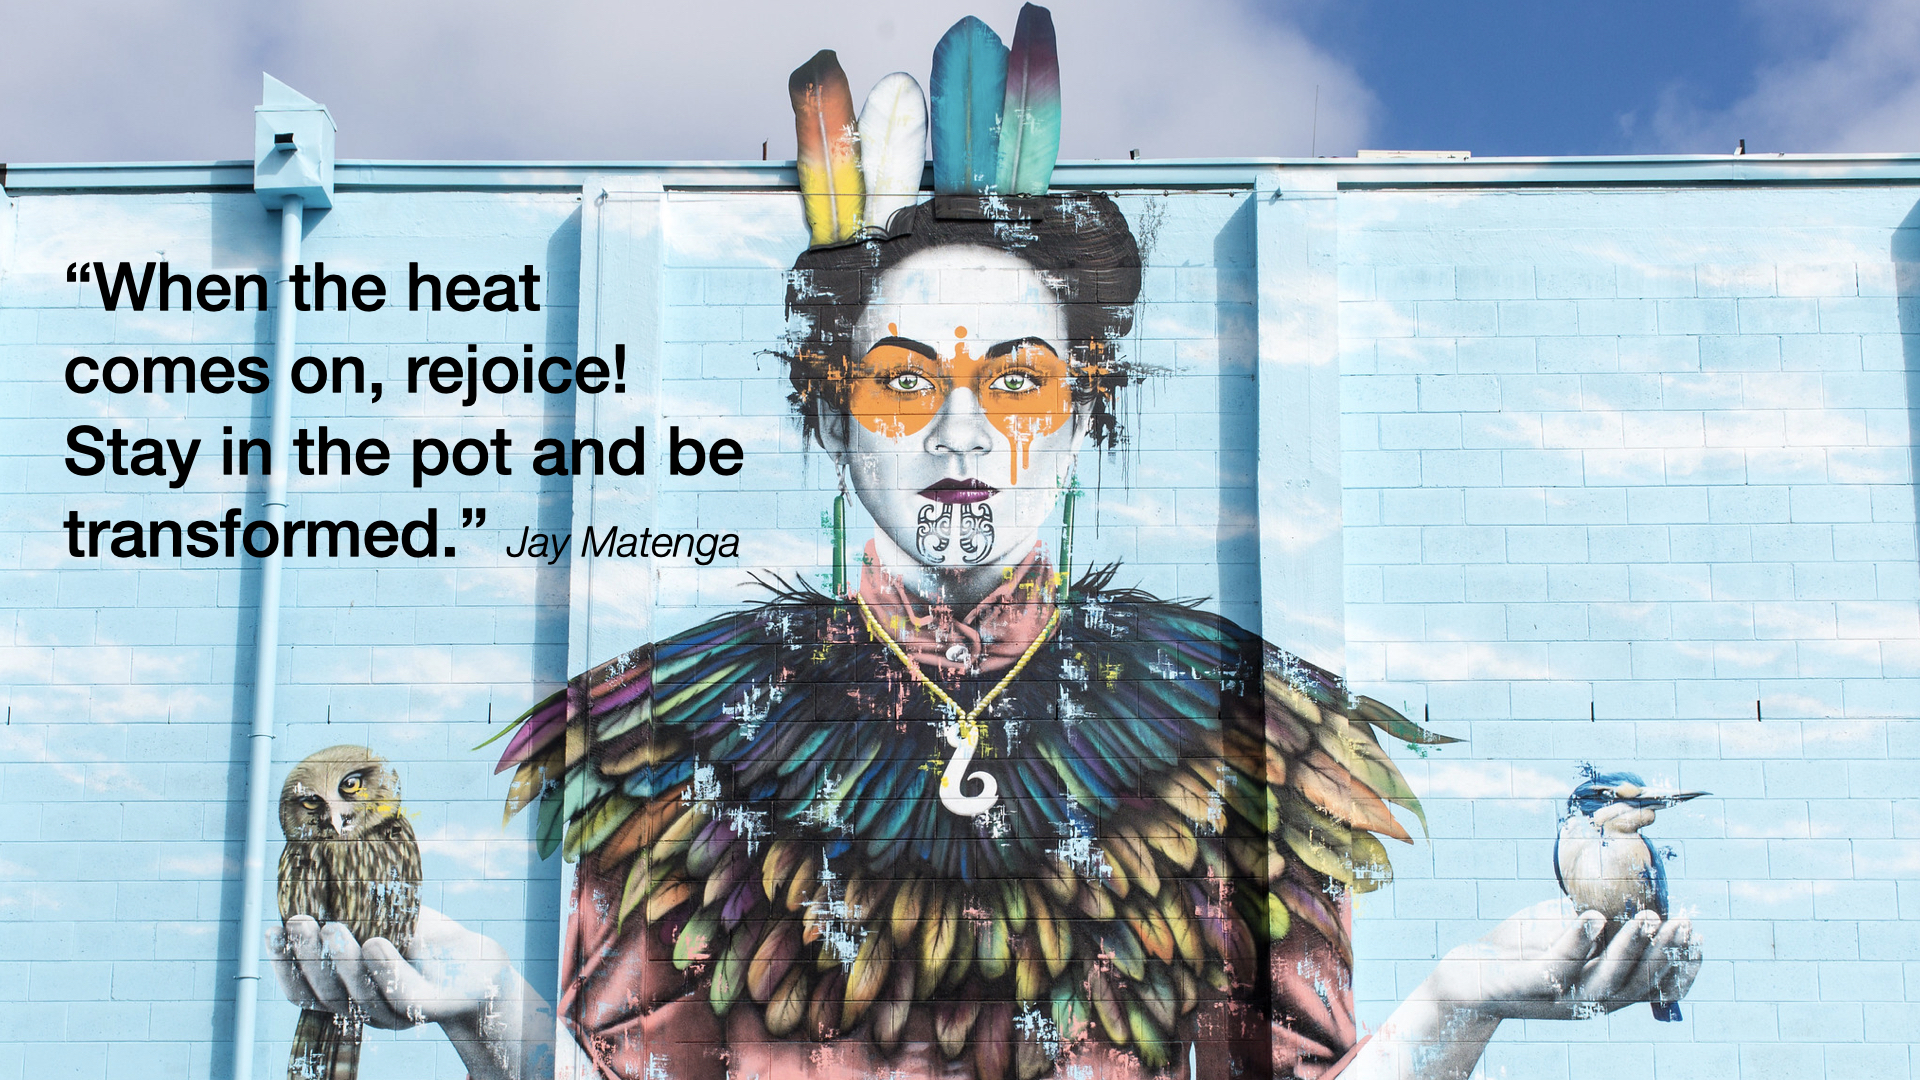 Street art with quote: "When the heat comes on, rejoice! Stay in the pot and be transformed." - Jay Matenga